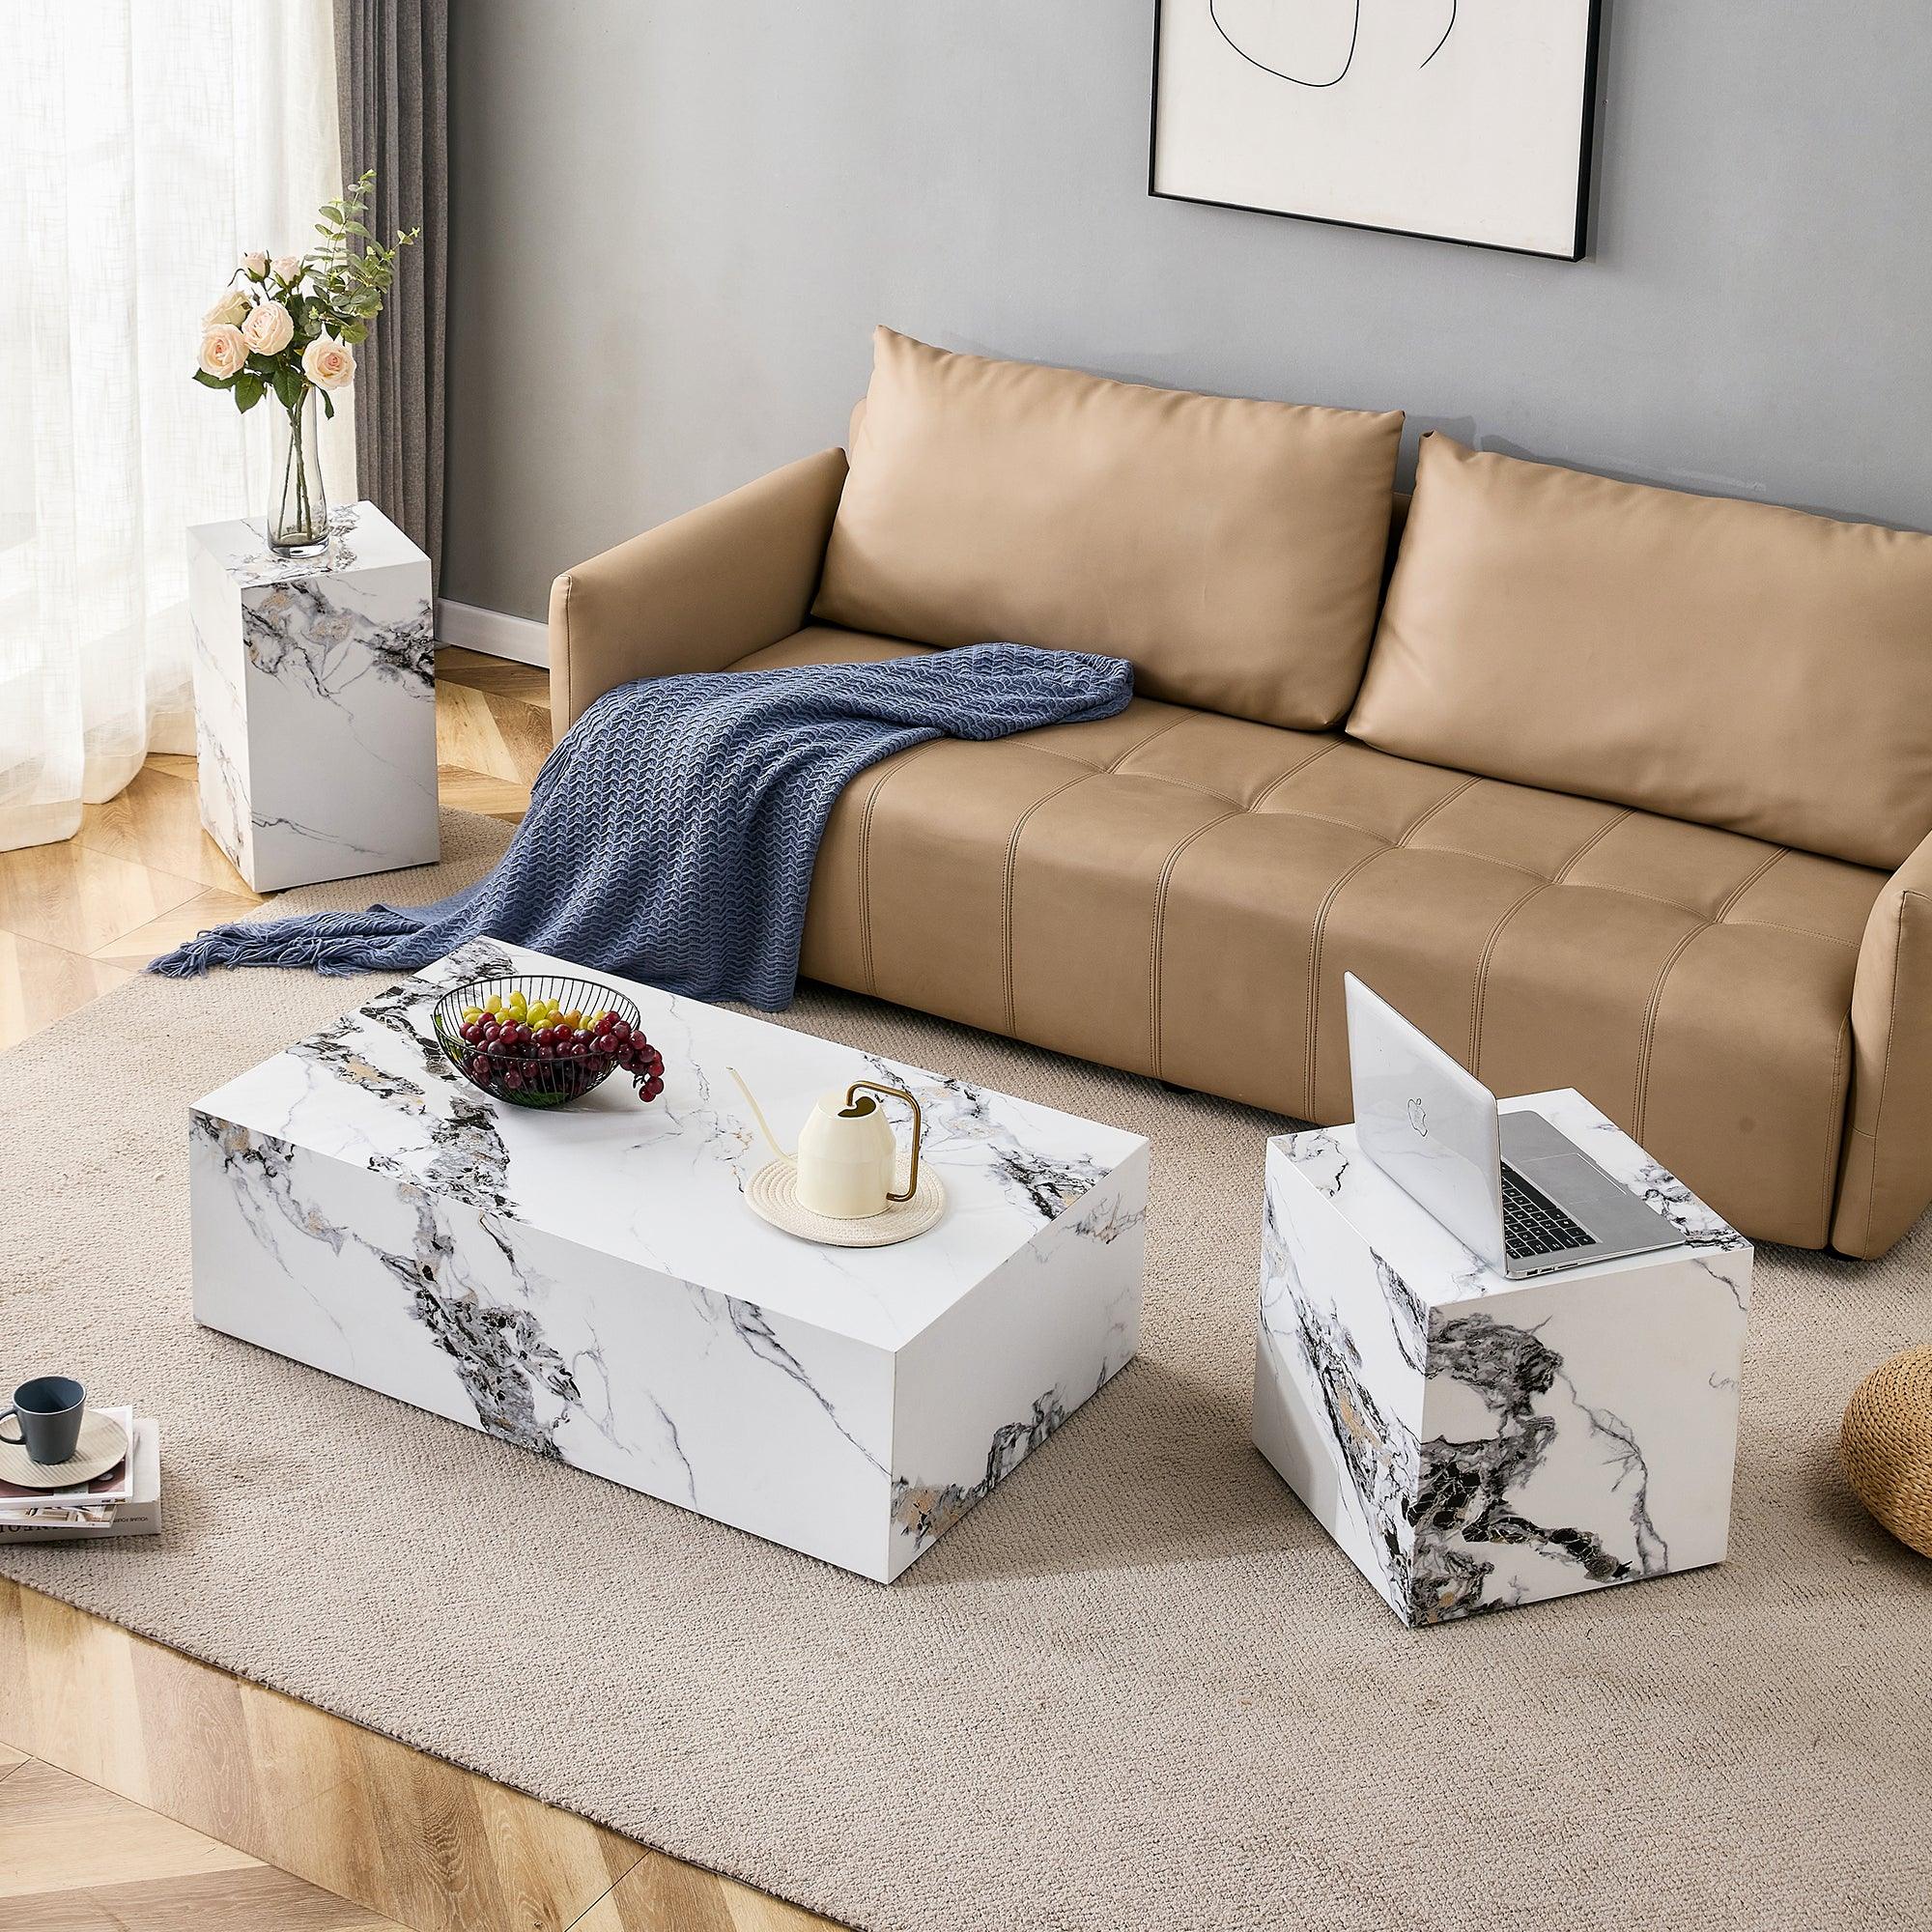 🆓🚛 Modern Mdf Coffee Table With Marble Pattern - 39.37X23.62X11.81 Inches - Stylish & Durable Design